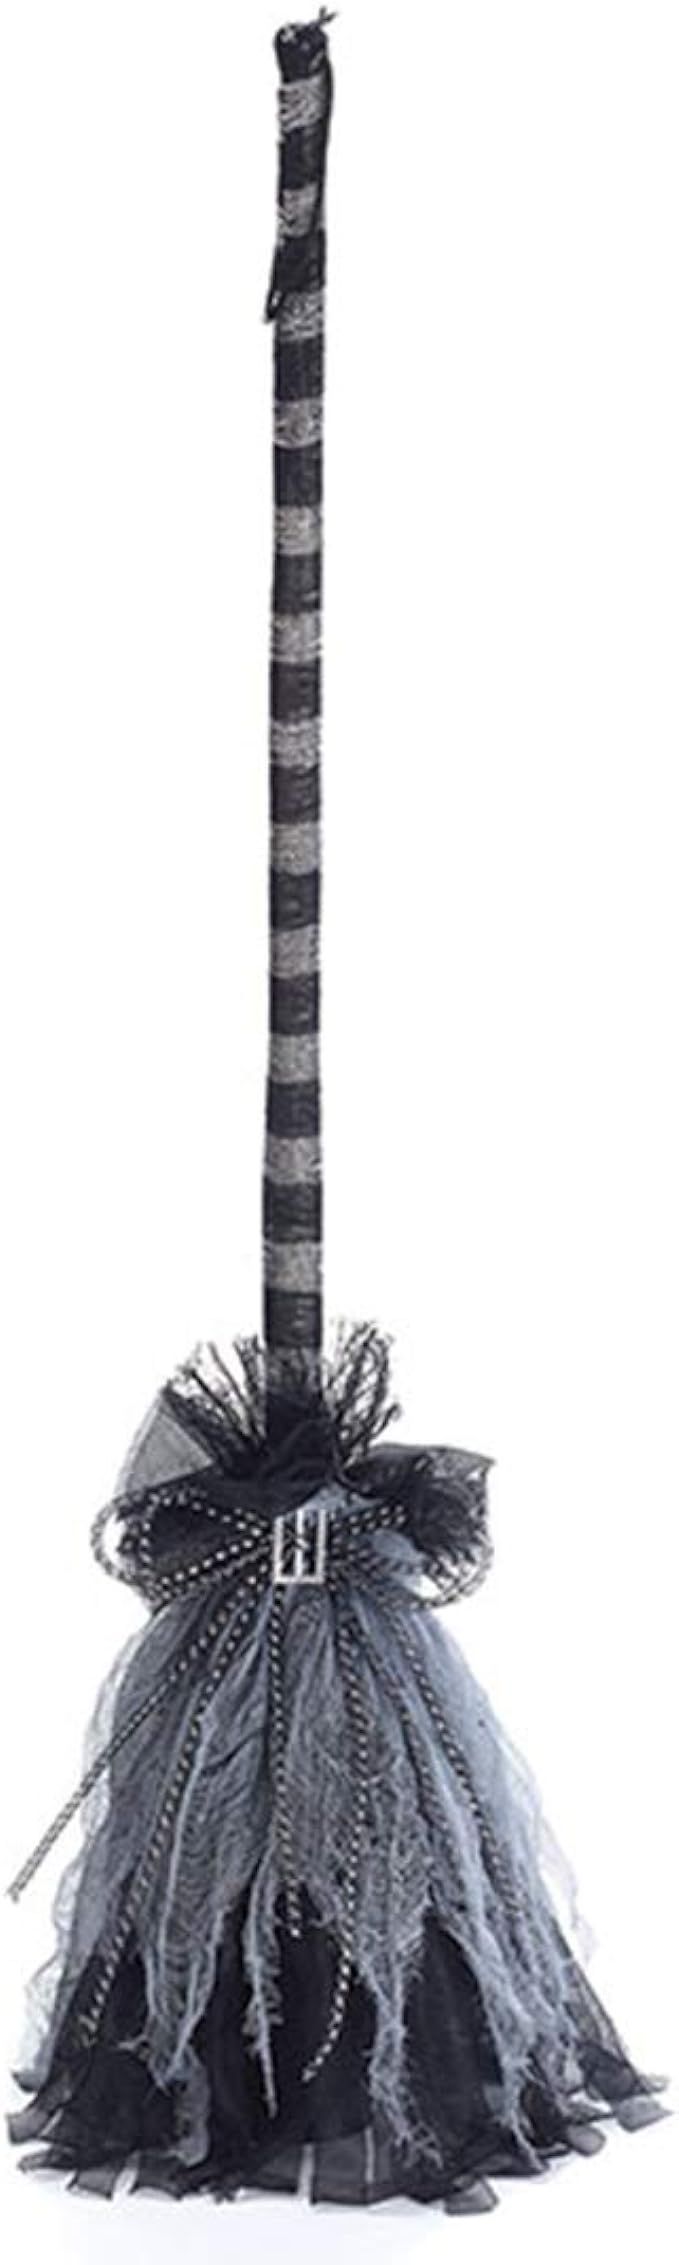 Halloween Decor Animated Black and Gray Witches Dancing Broom with Sound Effects, 35 Inches | Amazon (US)